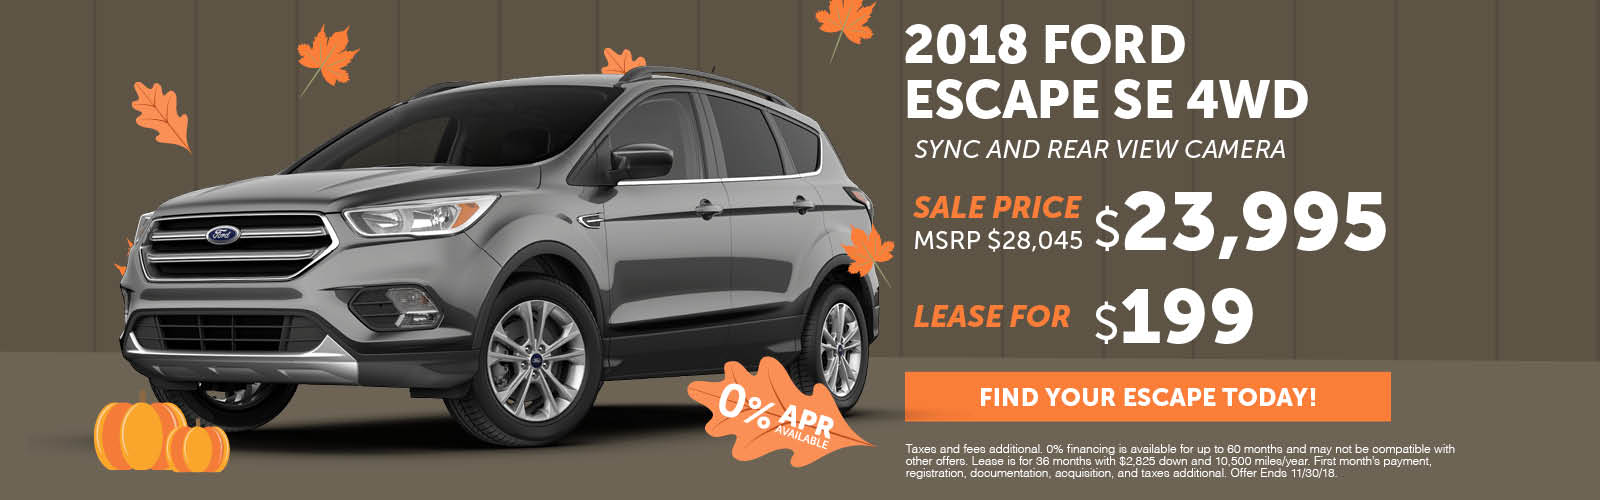 Ford Lease Specials And Deals In Boston Ma